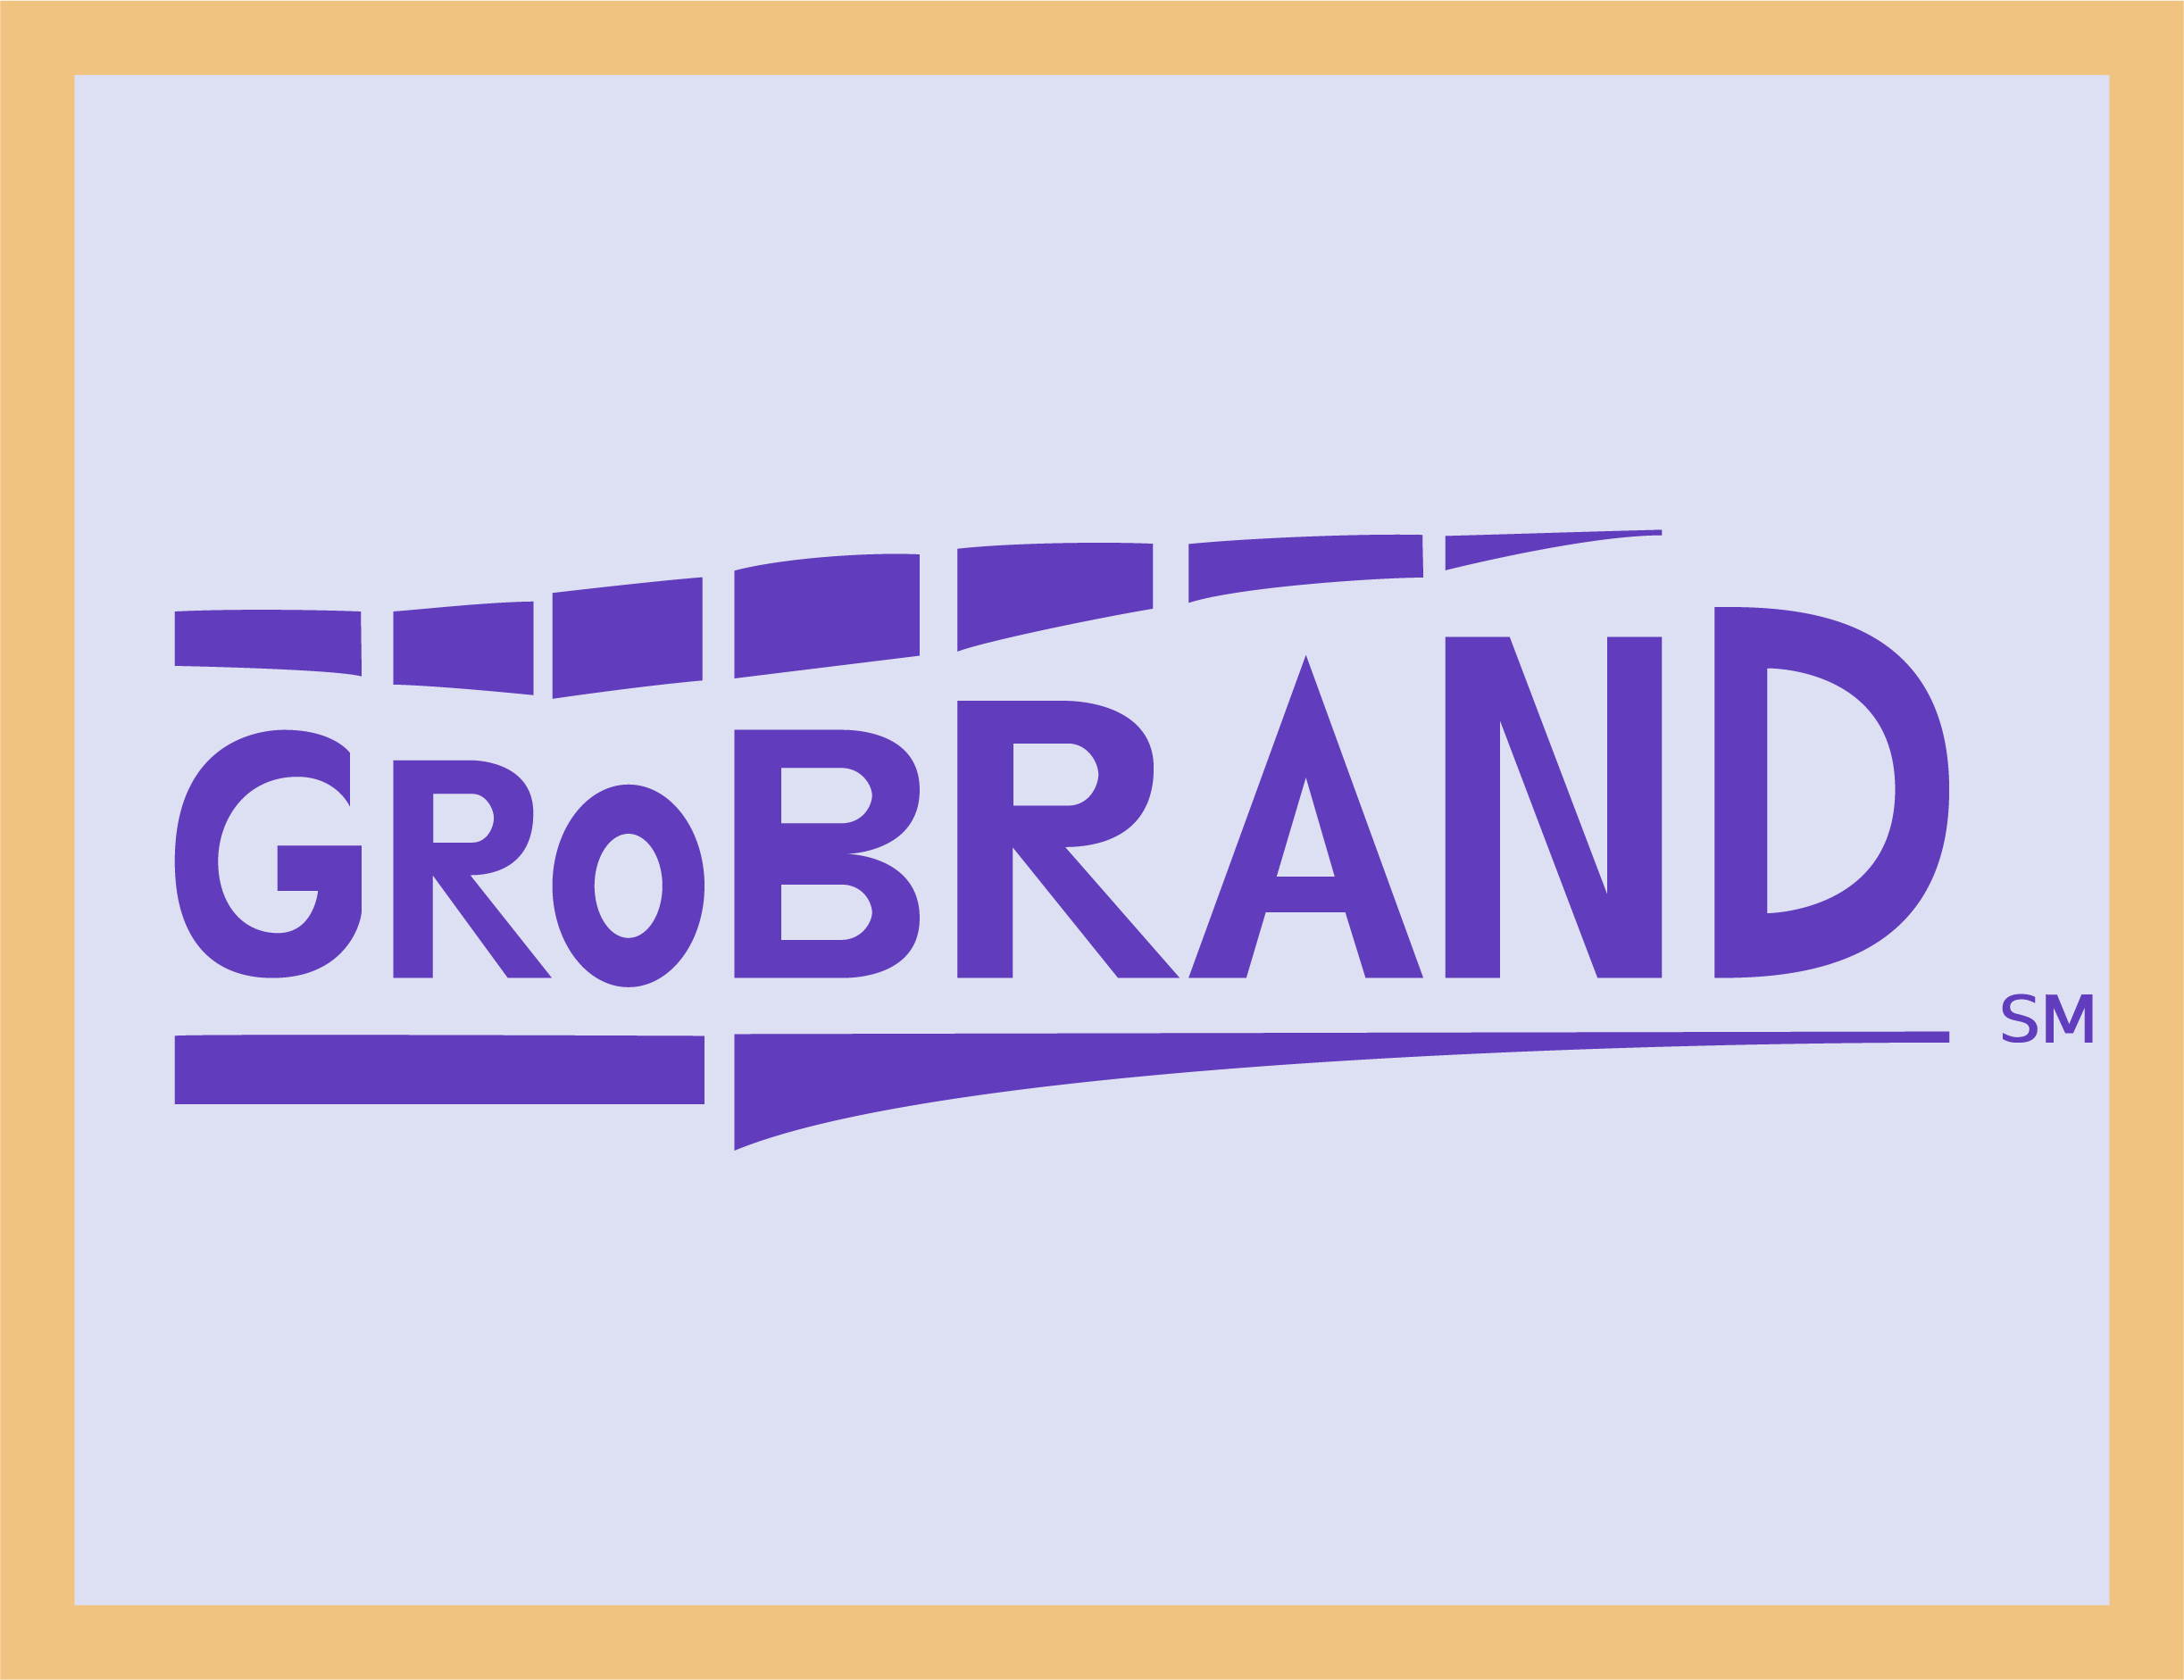 Logo of GROBRAND - the research product that is the 'brand strategy profiler'